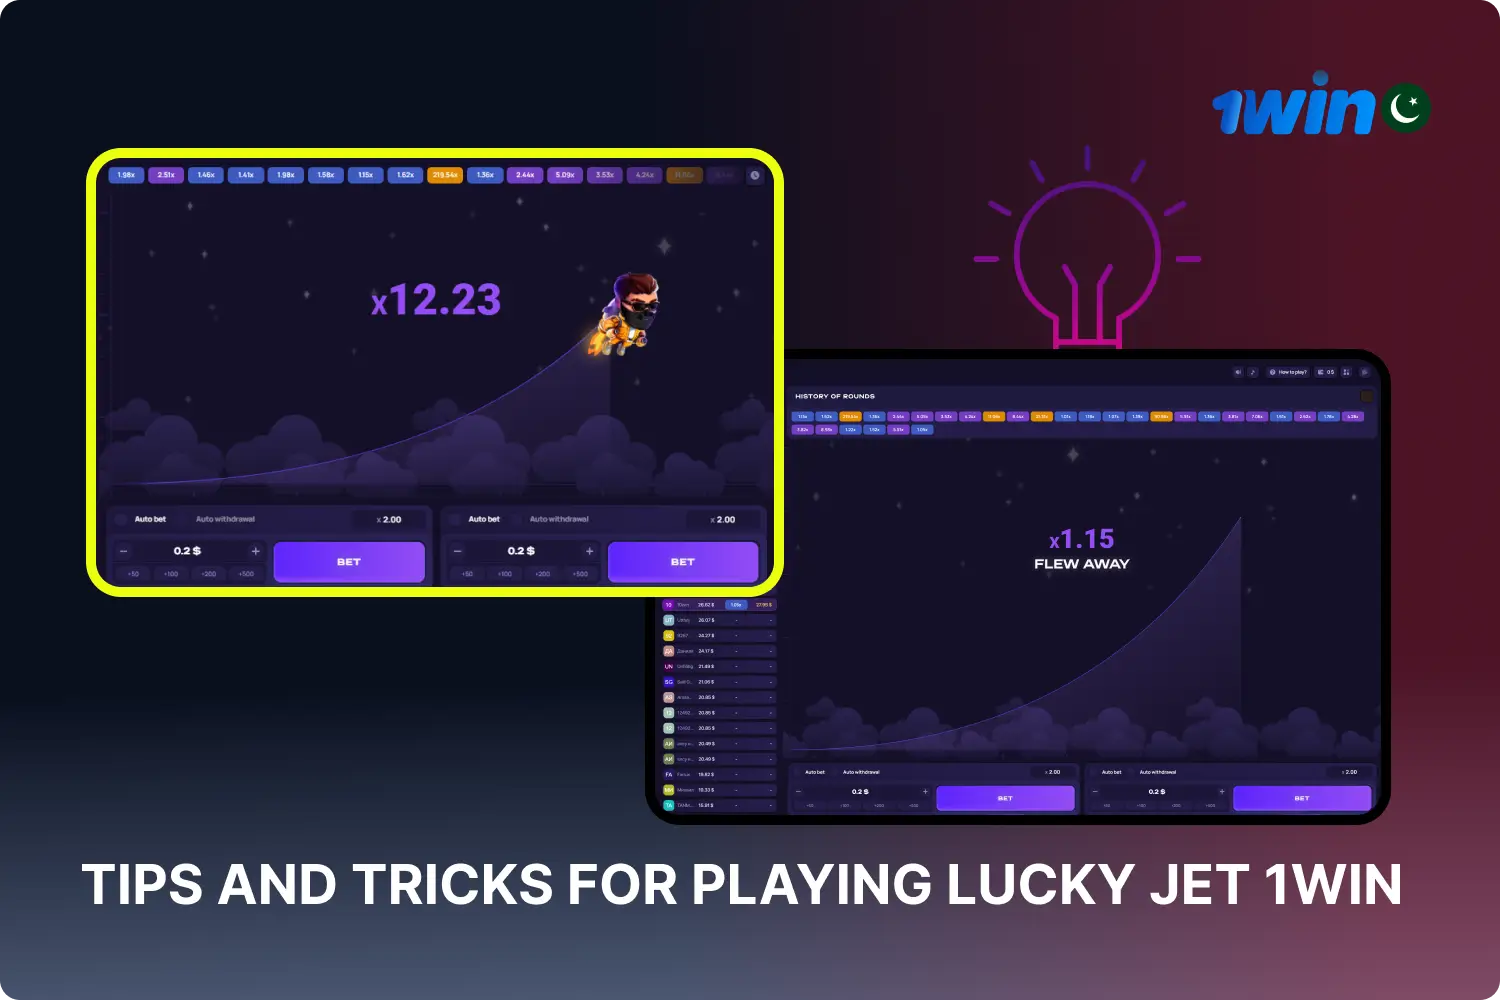 Gamblers will benefit from learning tips and tricks on playing Lucky Jet 1win to improve their chances of winning